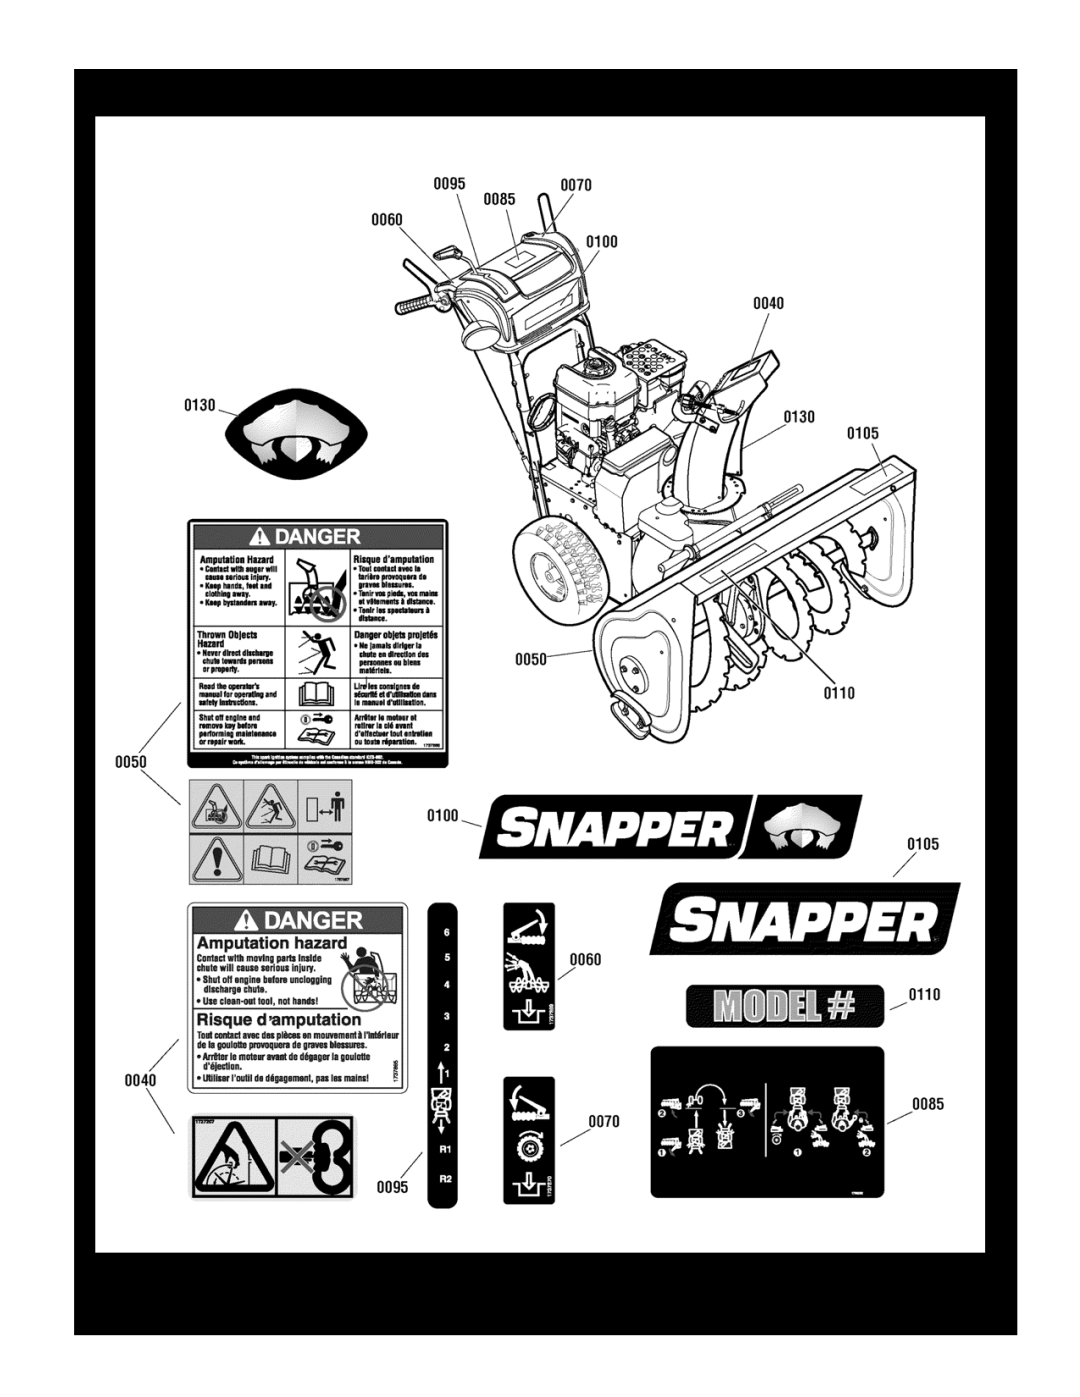 Snapper 1696004, 1696011, 1696012, 1696006 manual Decals Group, Reproduction, Manual No, 7105286, 26, 28 & 30 TWO STAGE, 2011 